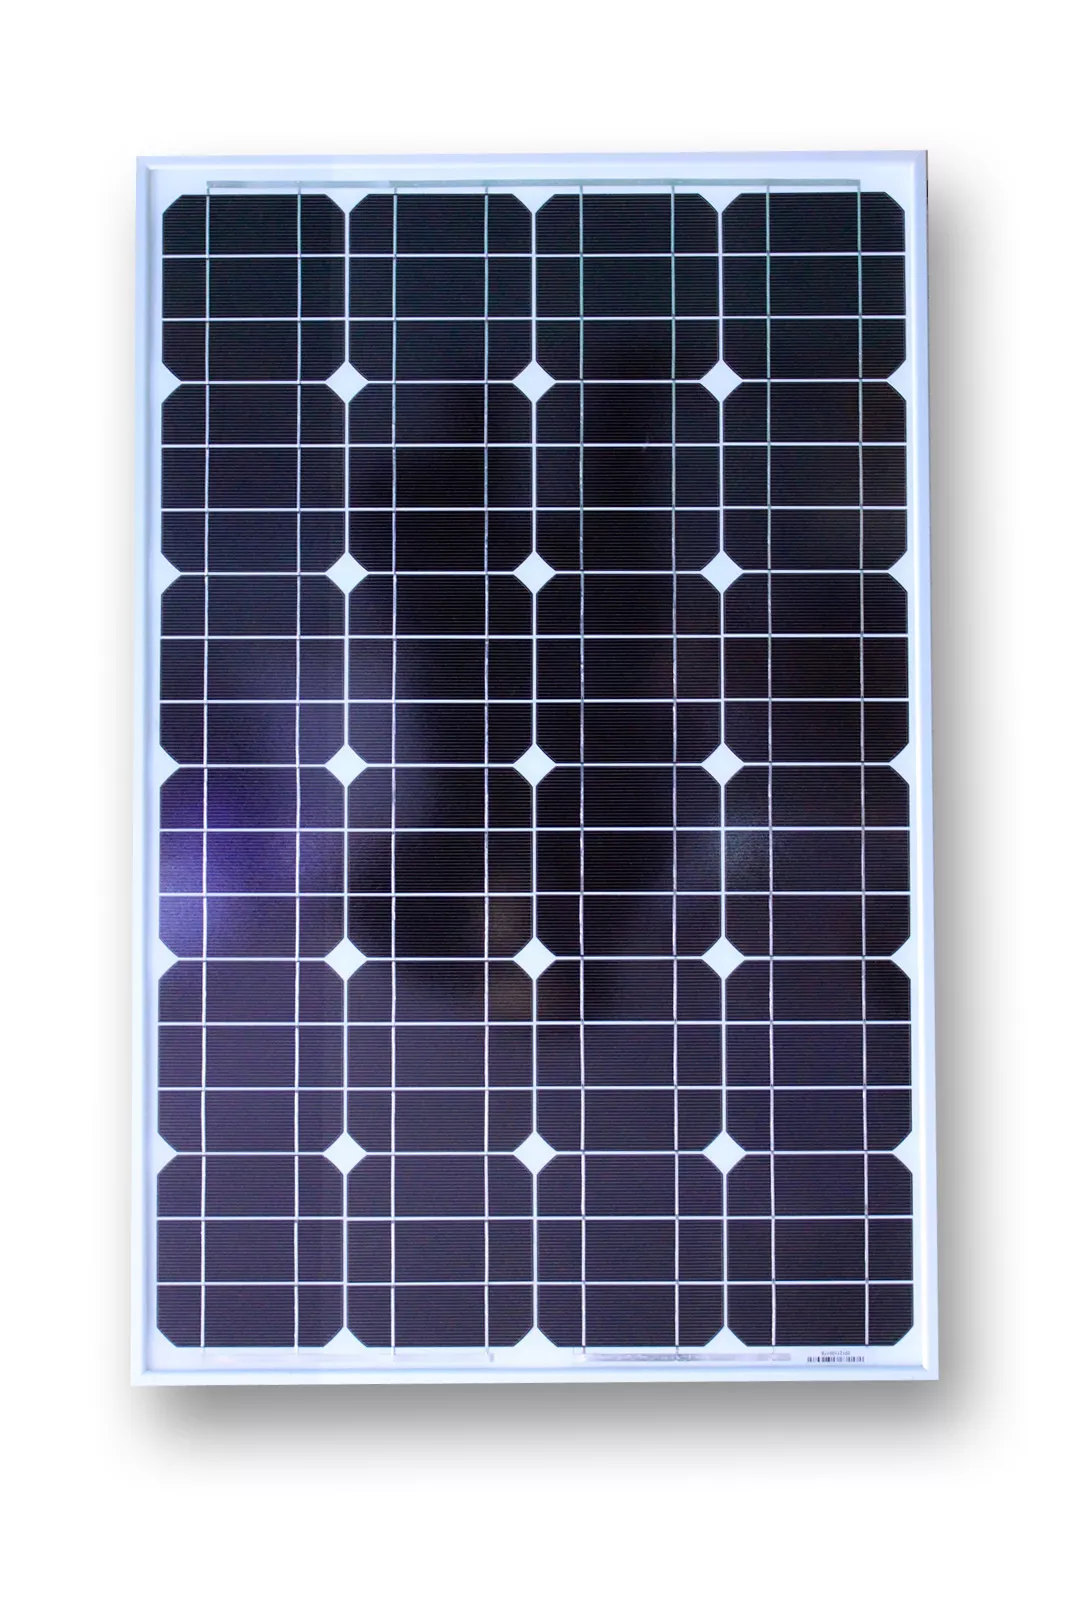 What is the difference between IBC solar cells and ordinary solar cells?